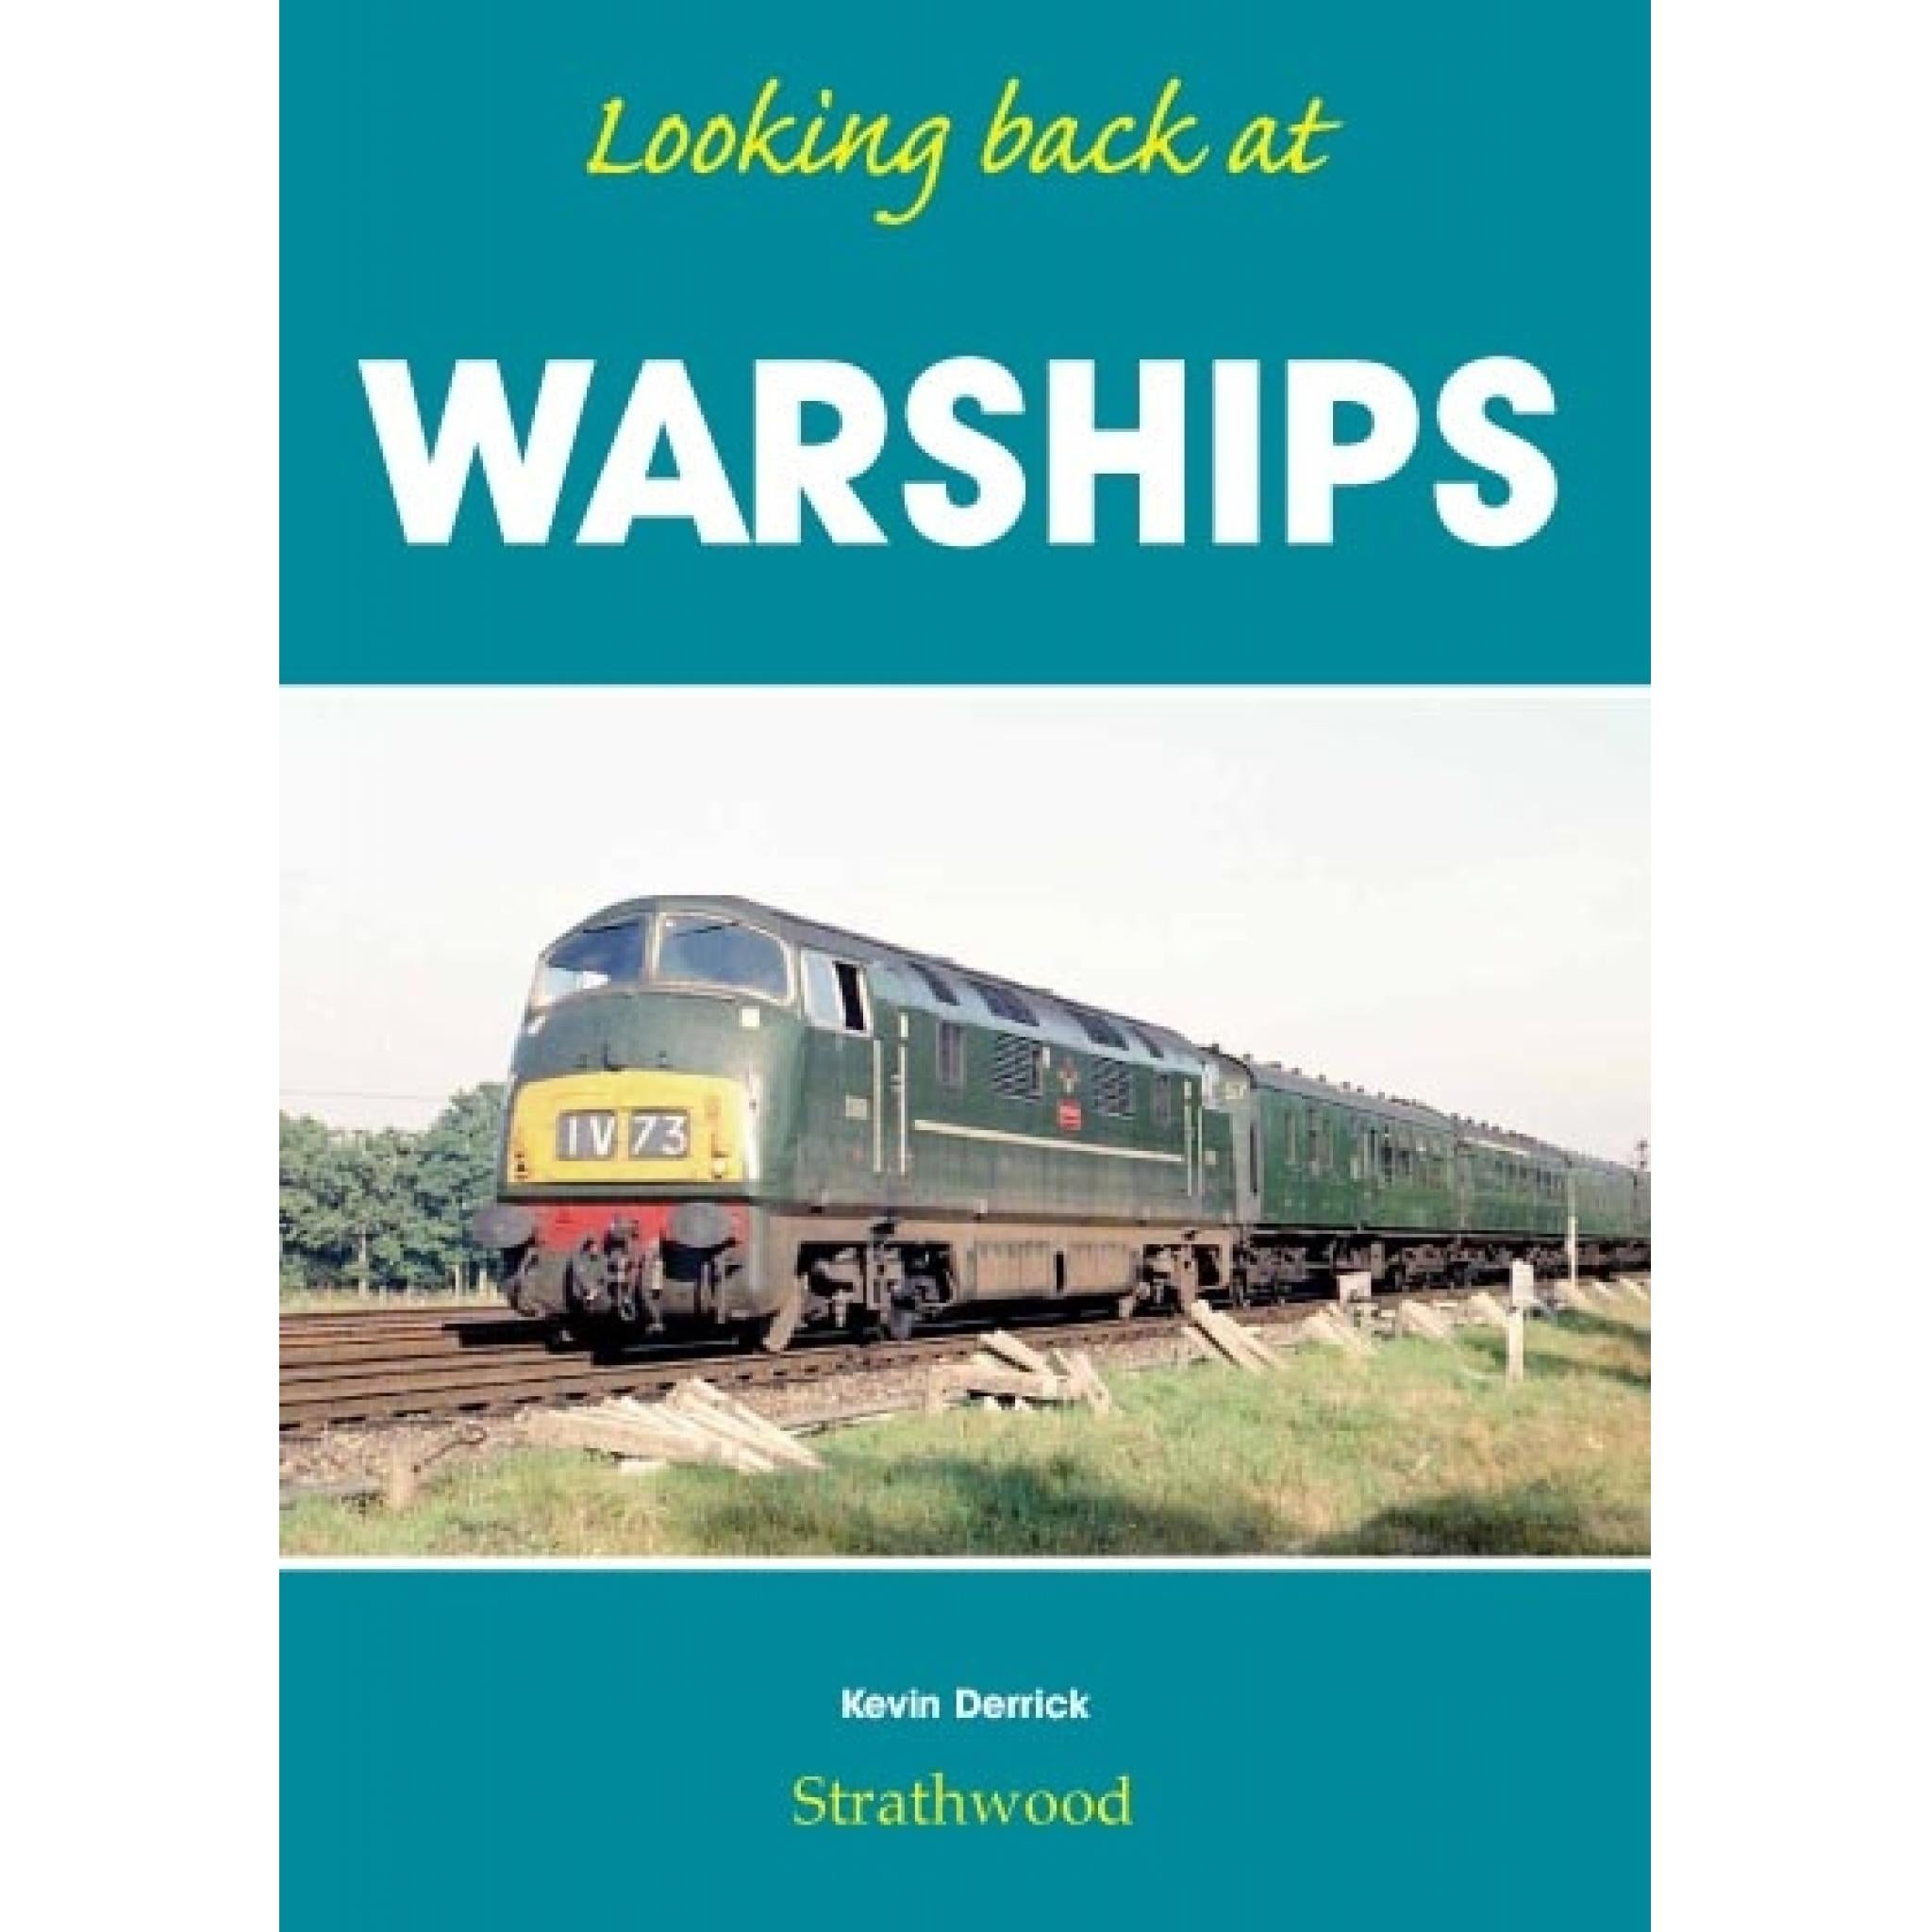 50%+ OFF RRP is £19.95  Looking back at WARSHIPS